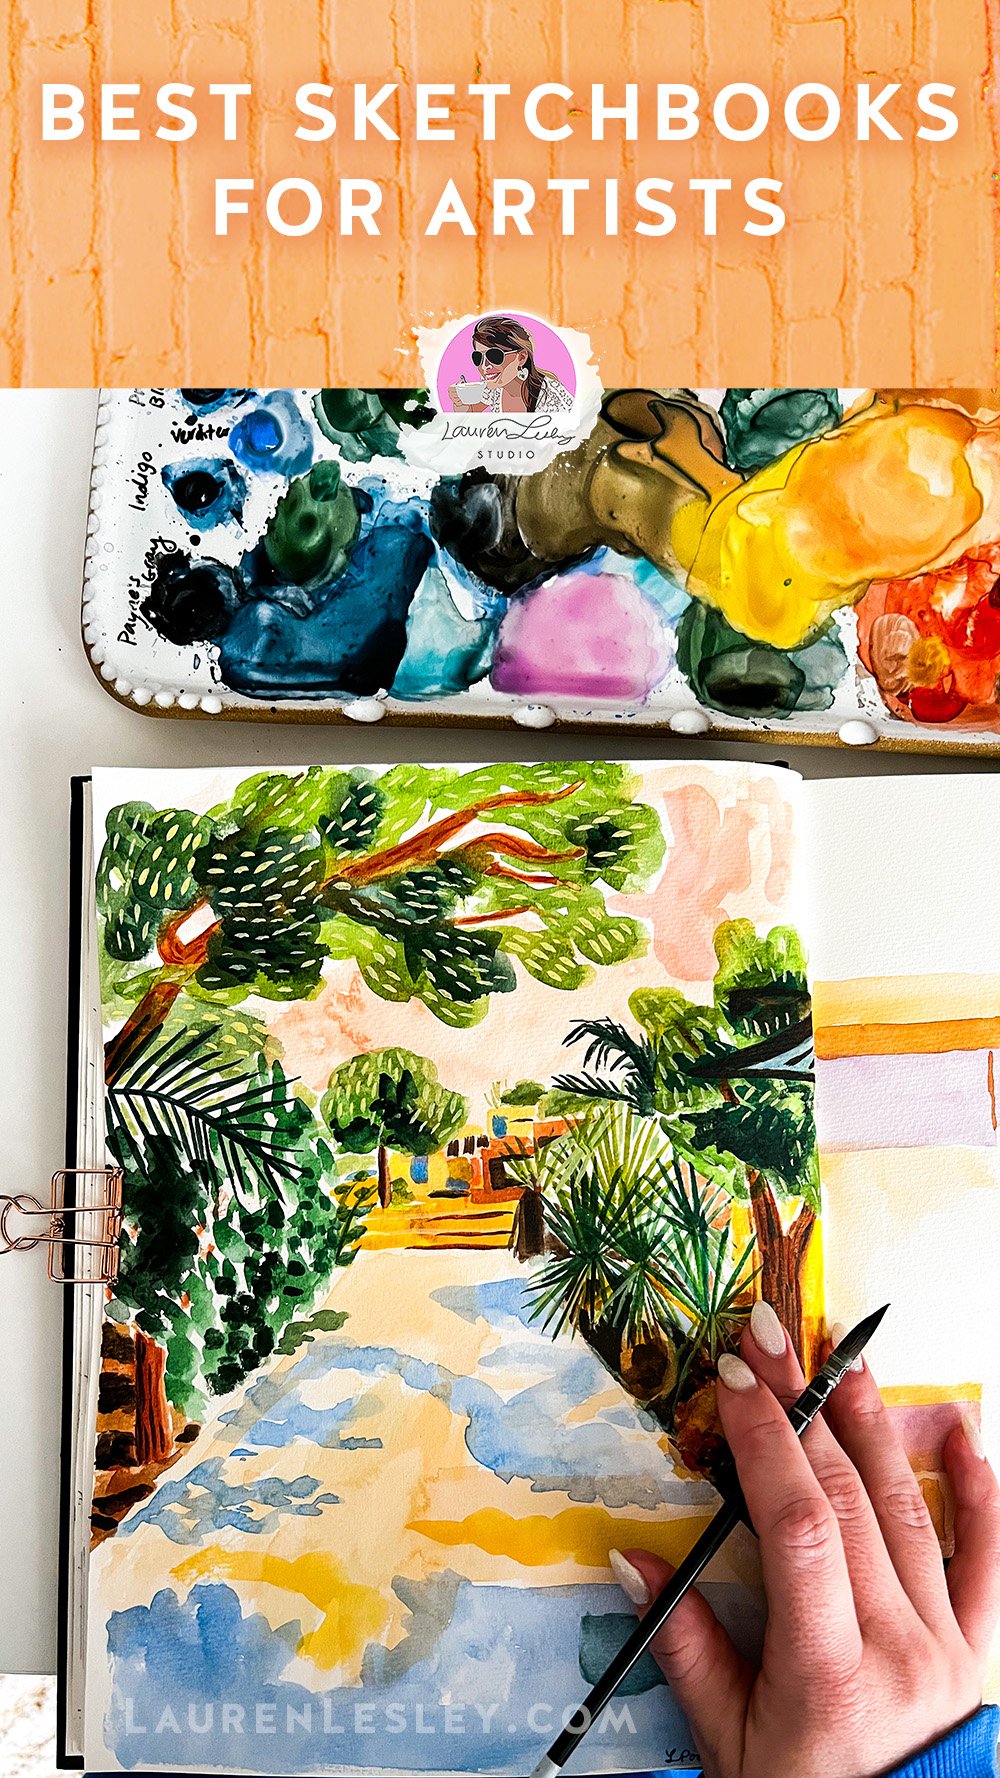 Sketchbook Painting, Watercolor Landscape, How to Fill Your Sketchbook